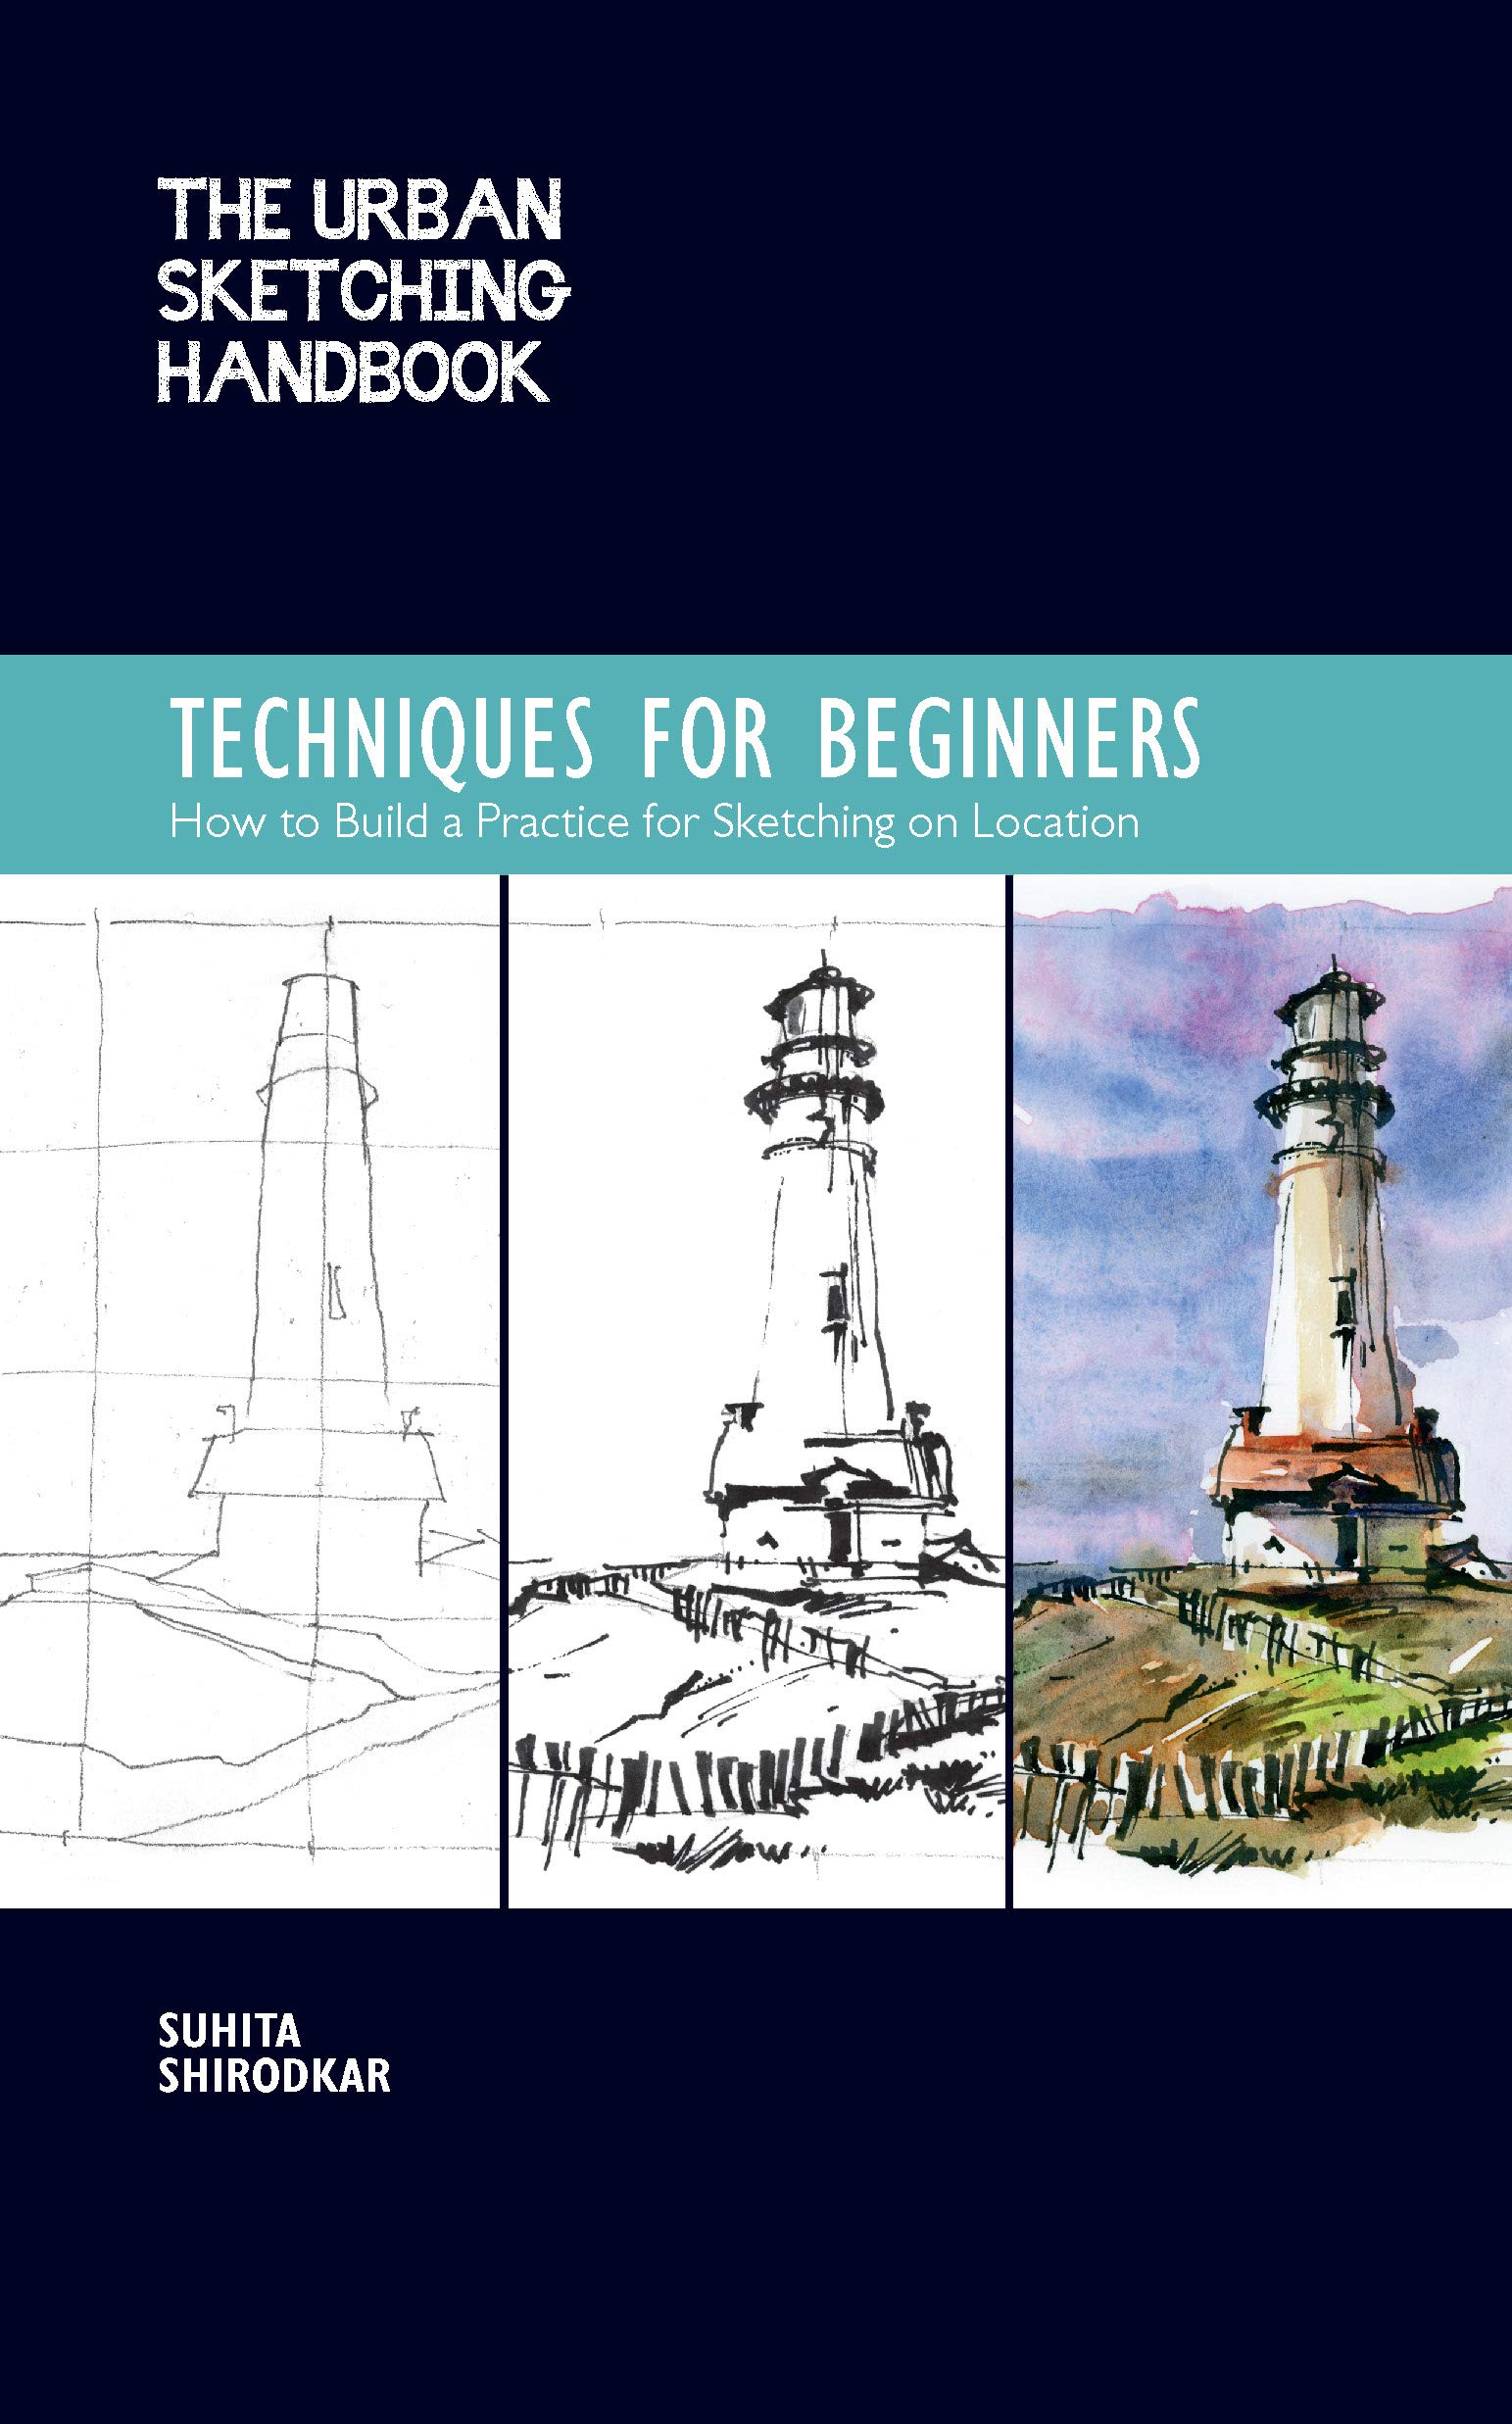 The Urban Sketching Handbook Techniques for Beginners: How to Build a Practice for Sketching on Location (Urban Sketching Handbooks)